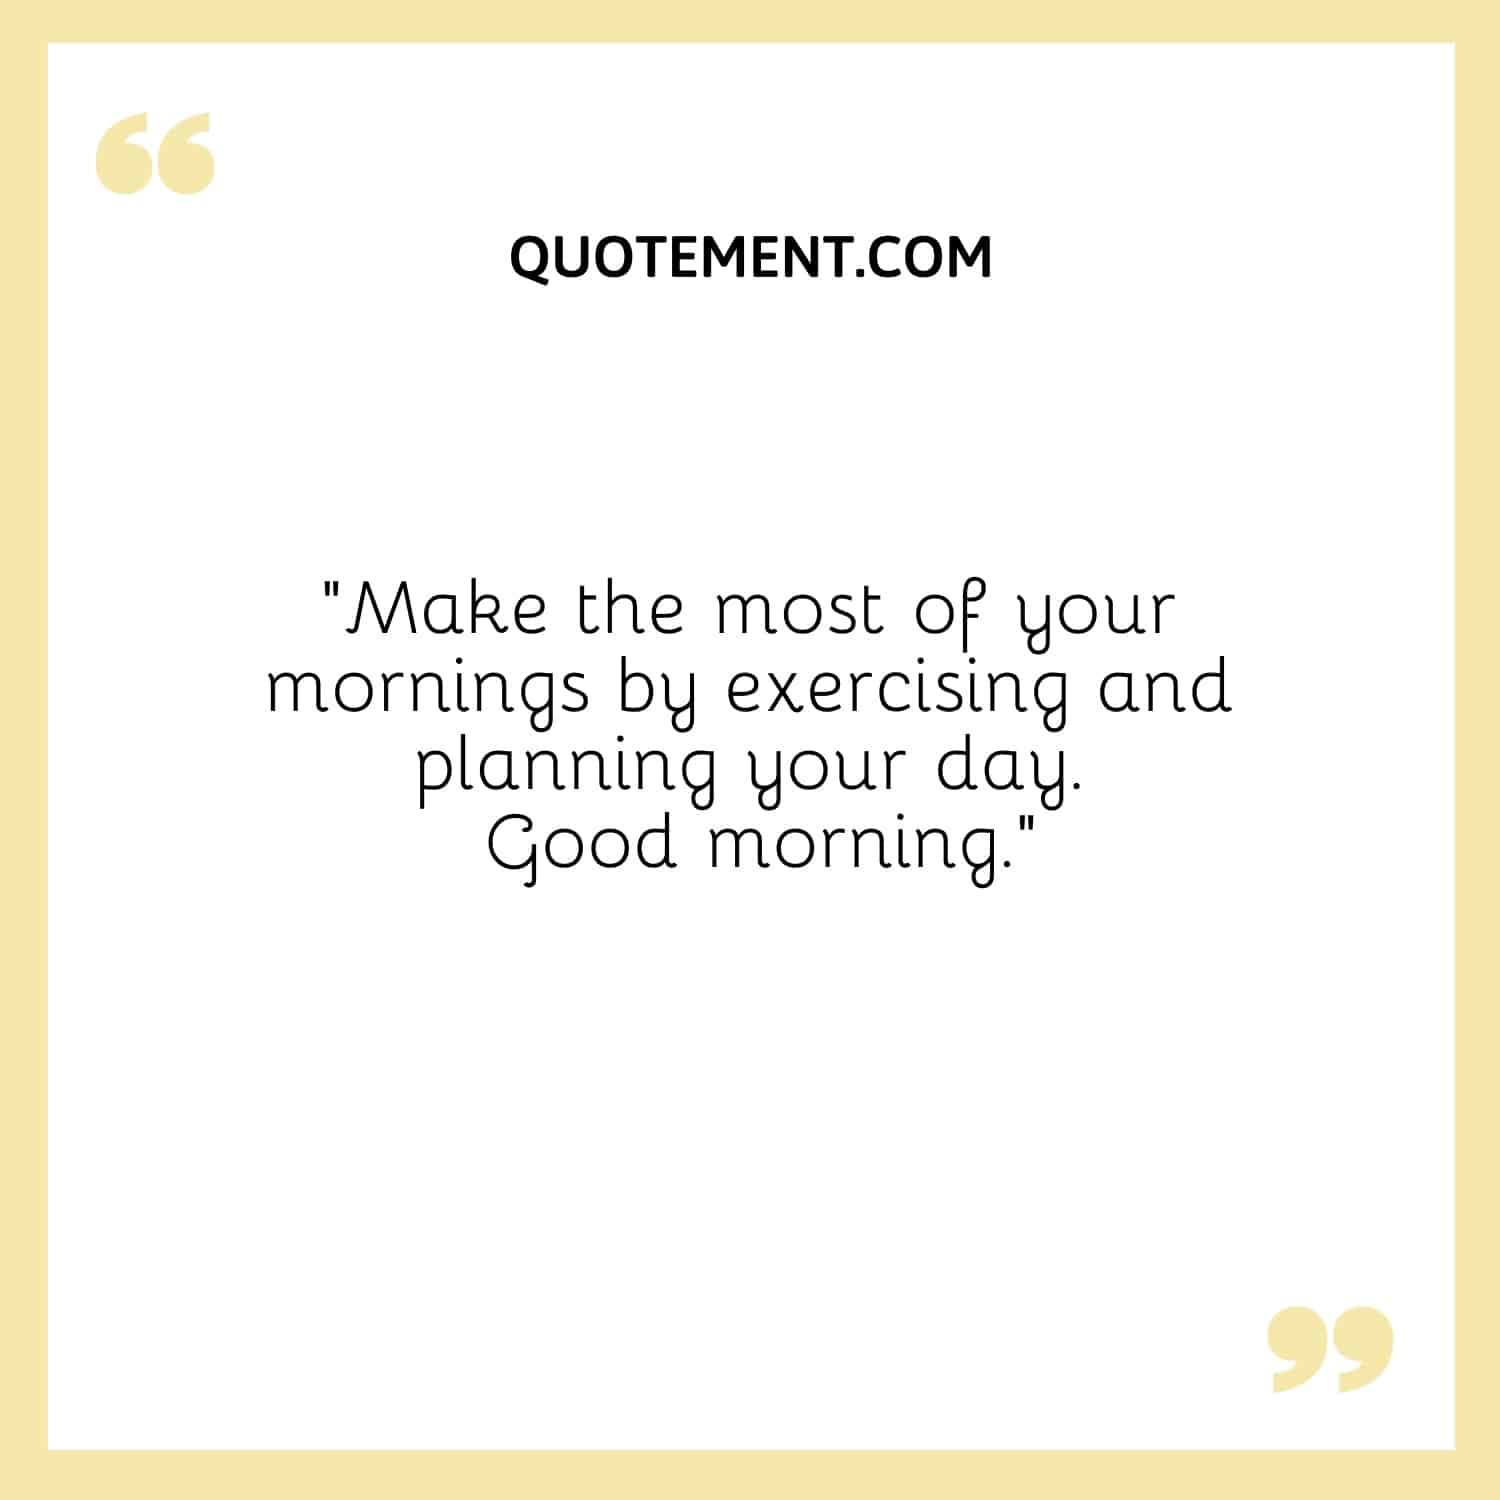 Make the most of your mornings